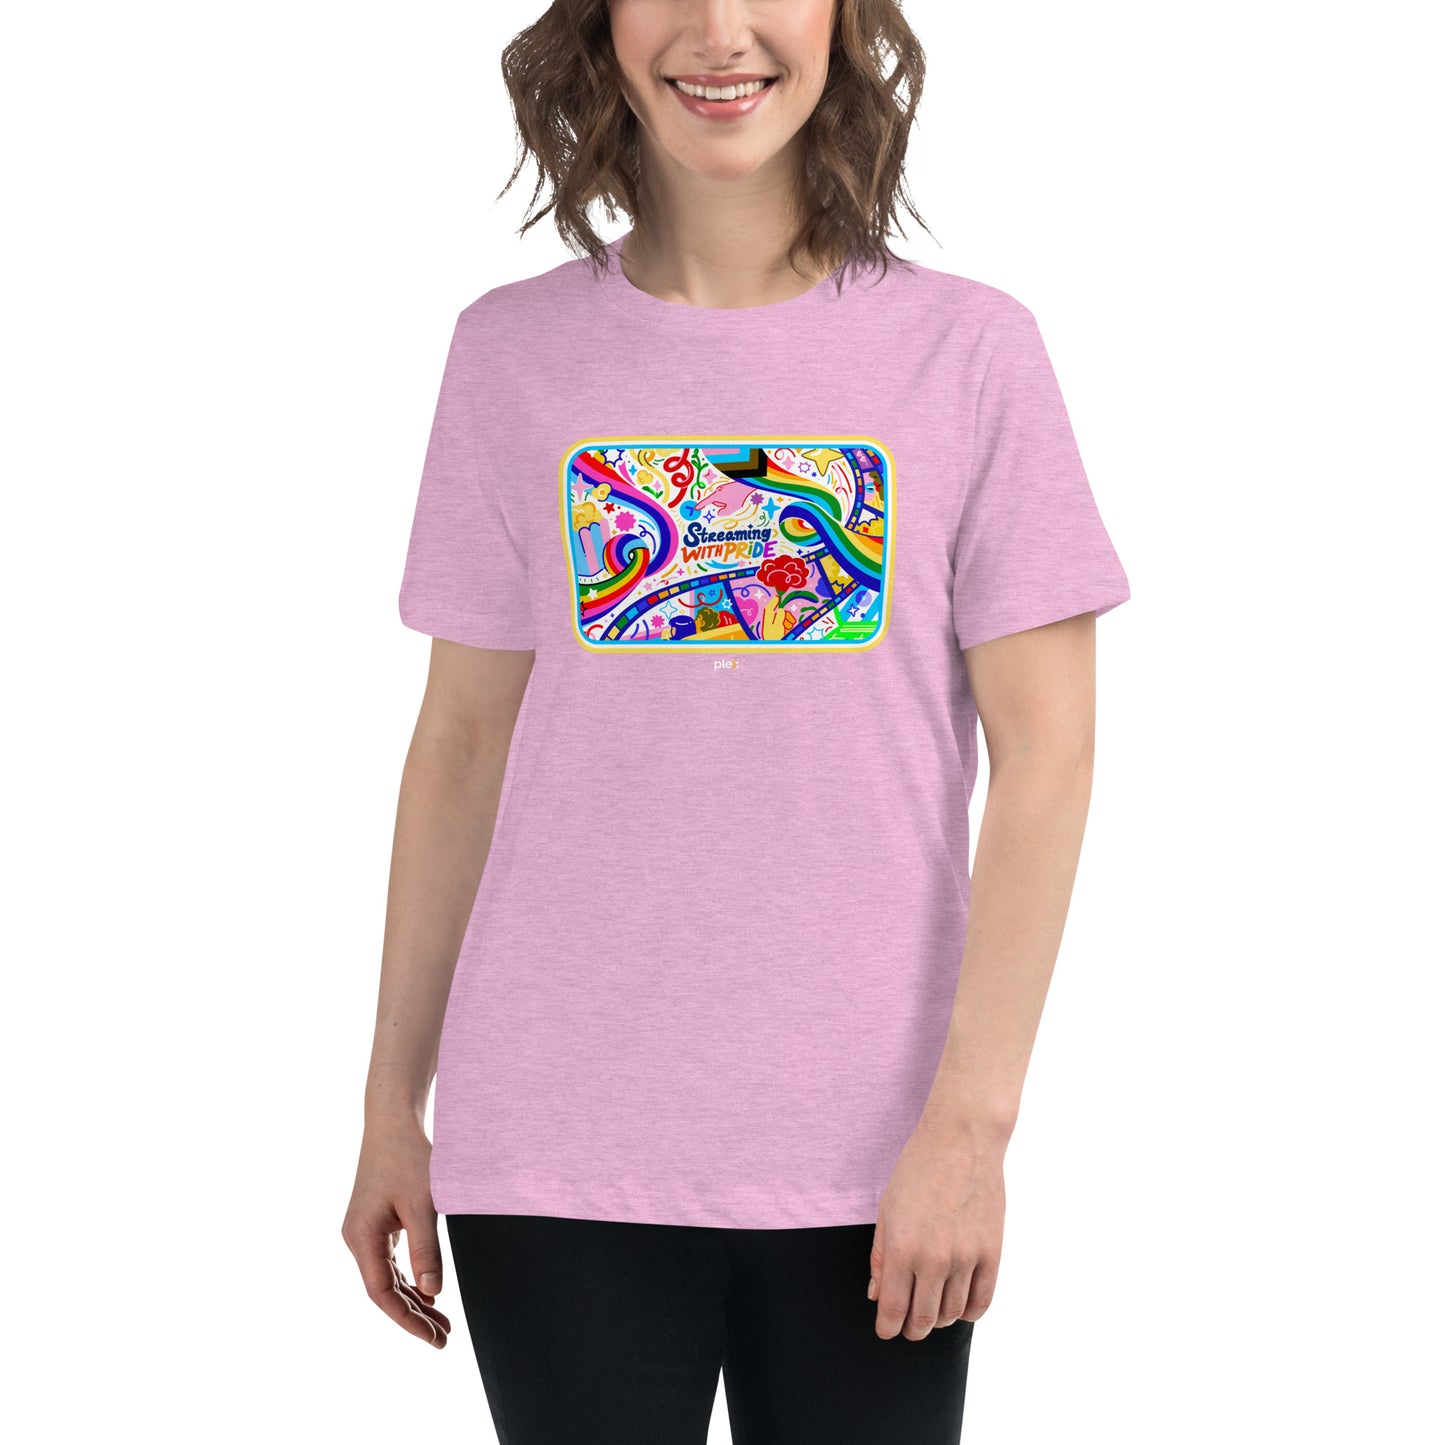 Women's Streaming with Pride T-Shirt